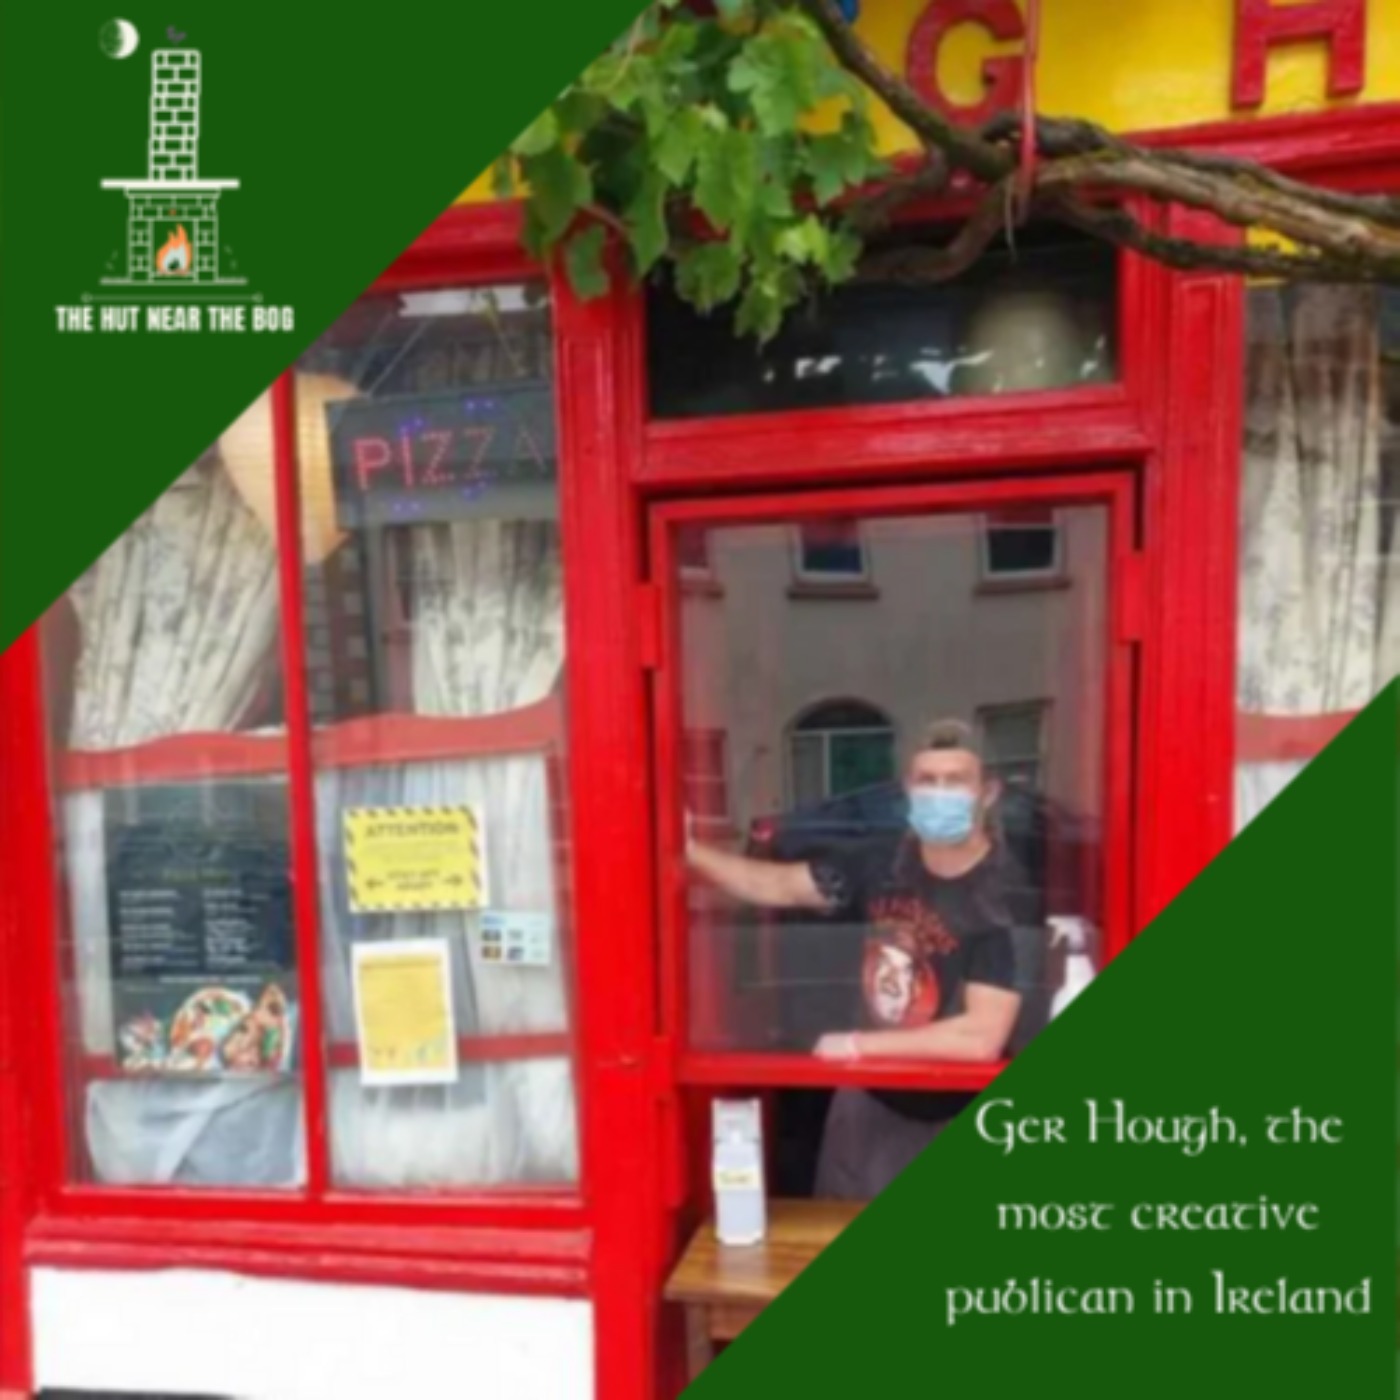 Ger Hough, the most creative publican in Ireland